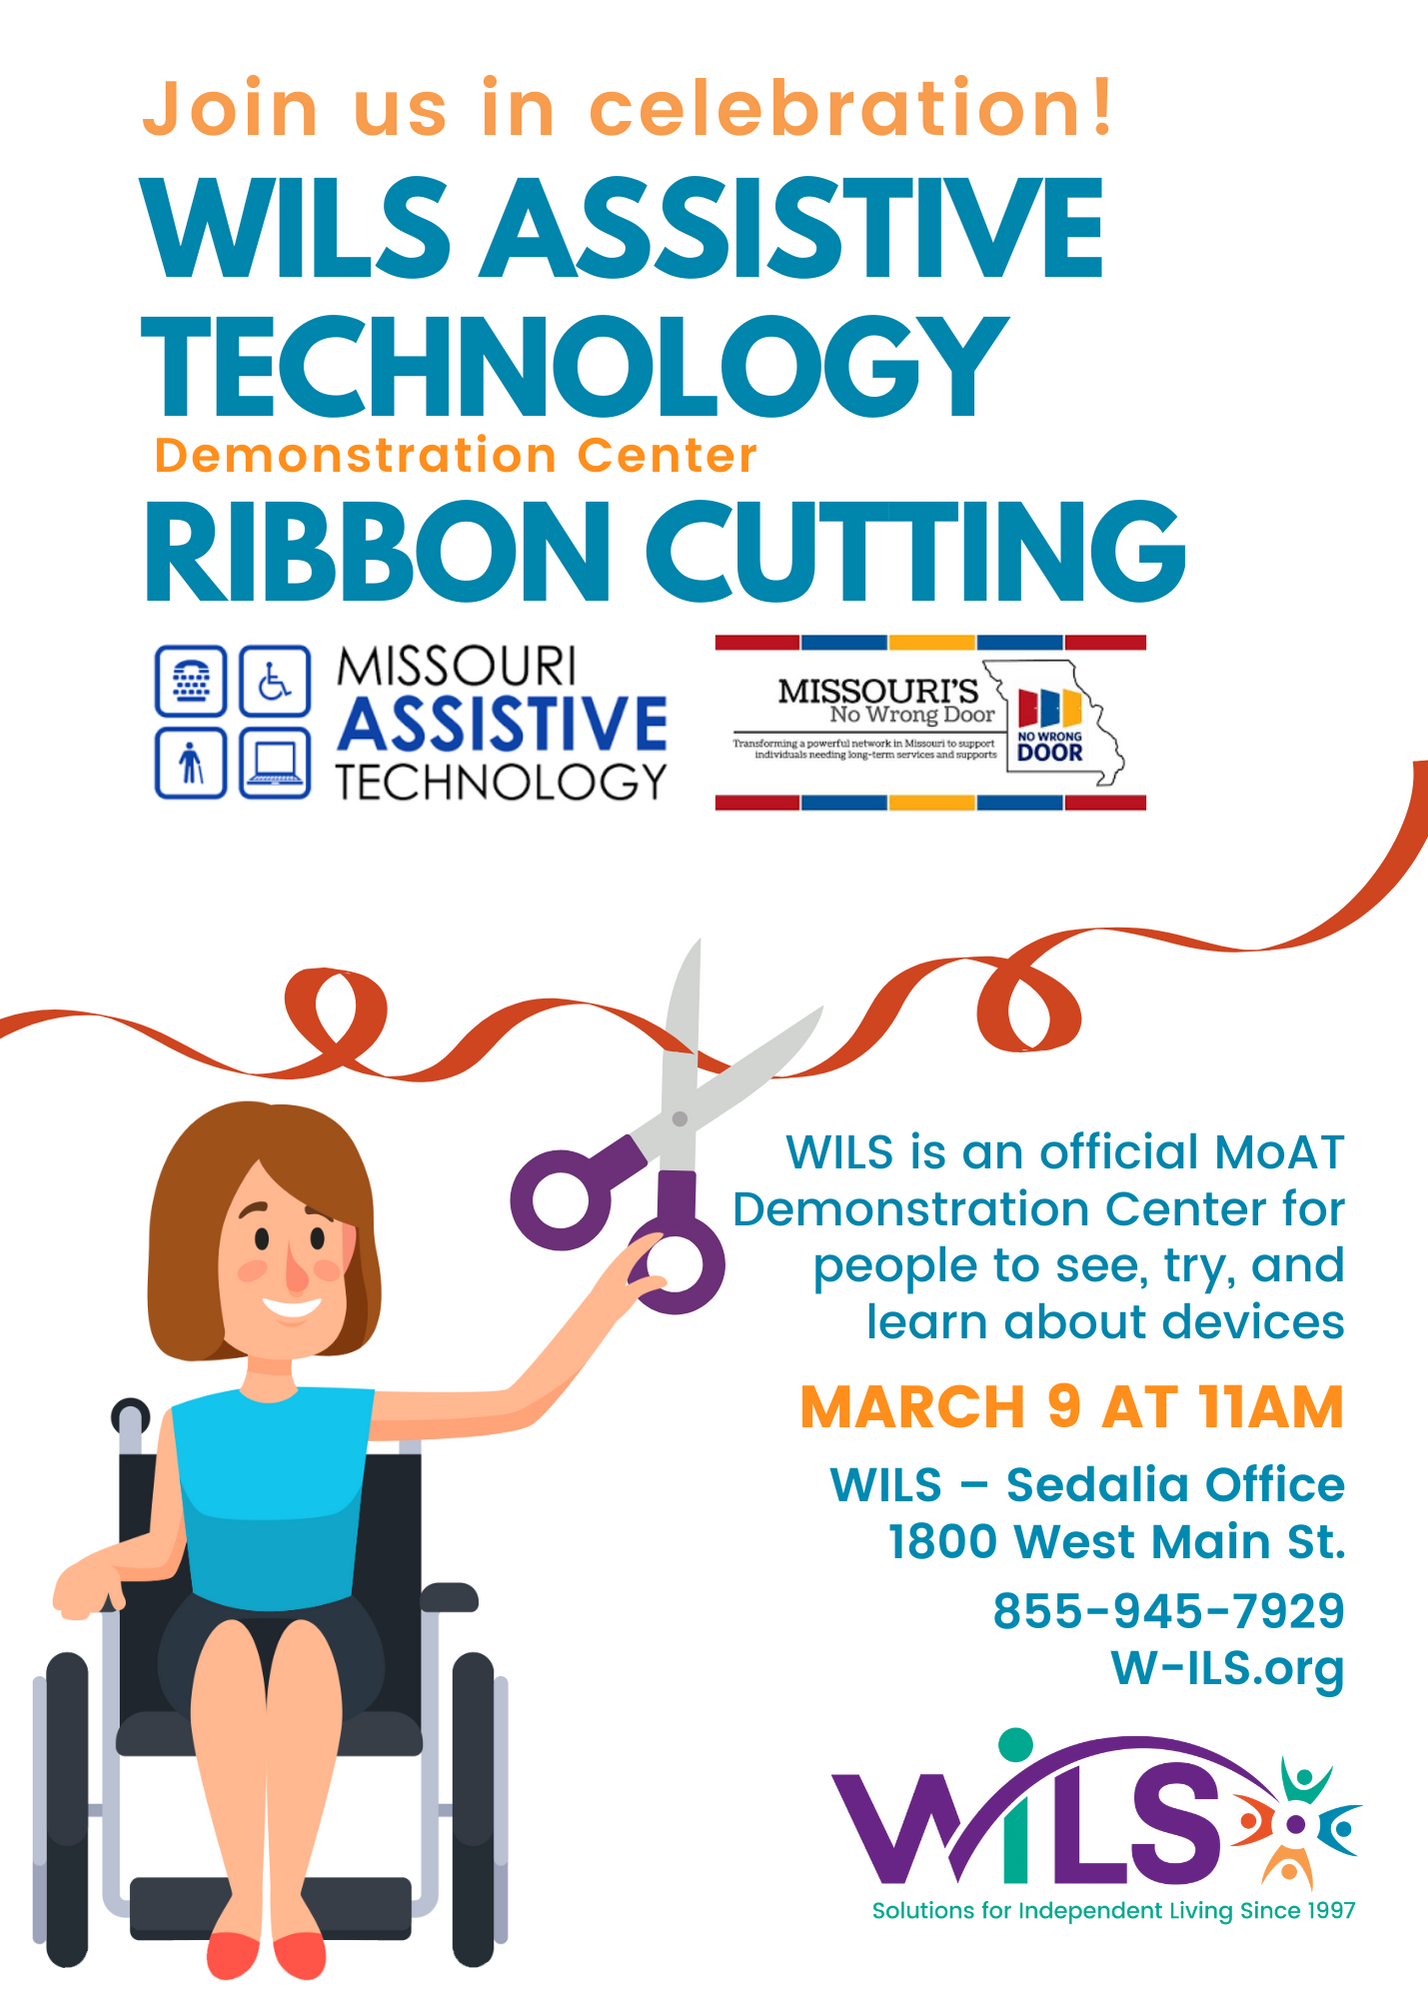 Join us in celebration for WILS Assistive Technology Demonstration Center Ribbon Cutting.   WILS is an official MoAT Demonstration Center for people to see, try, and learn about devices. W-ILS.org 855-945-7929